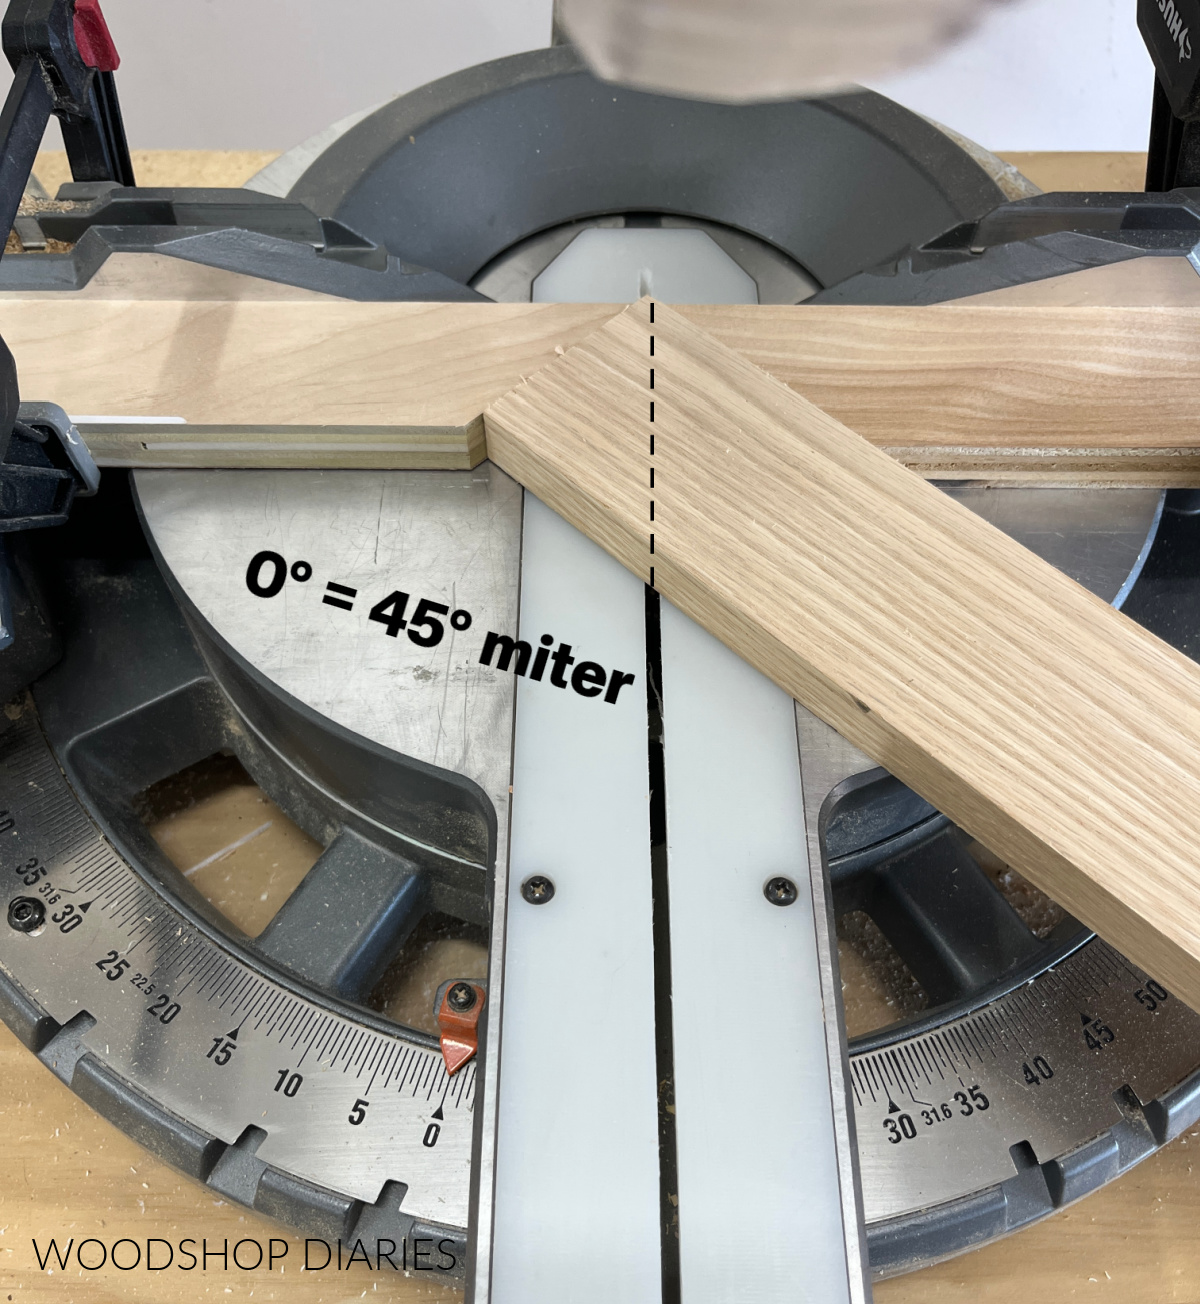 board placed in scrap blocks on miter saw showing 0 degree setting is a 45 degree cut